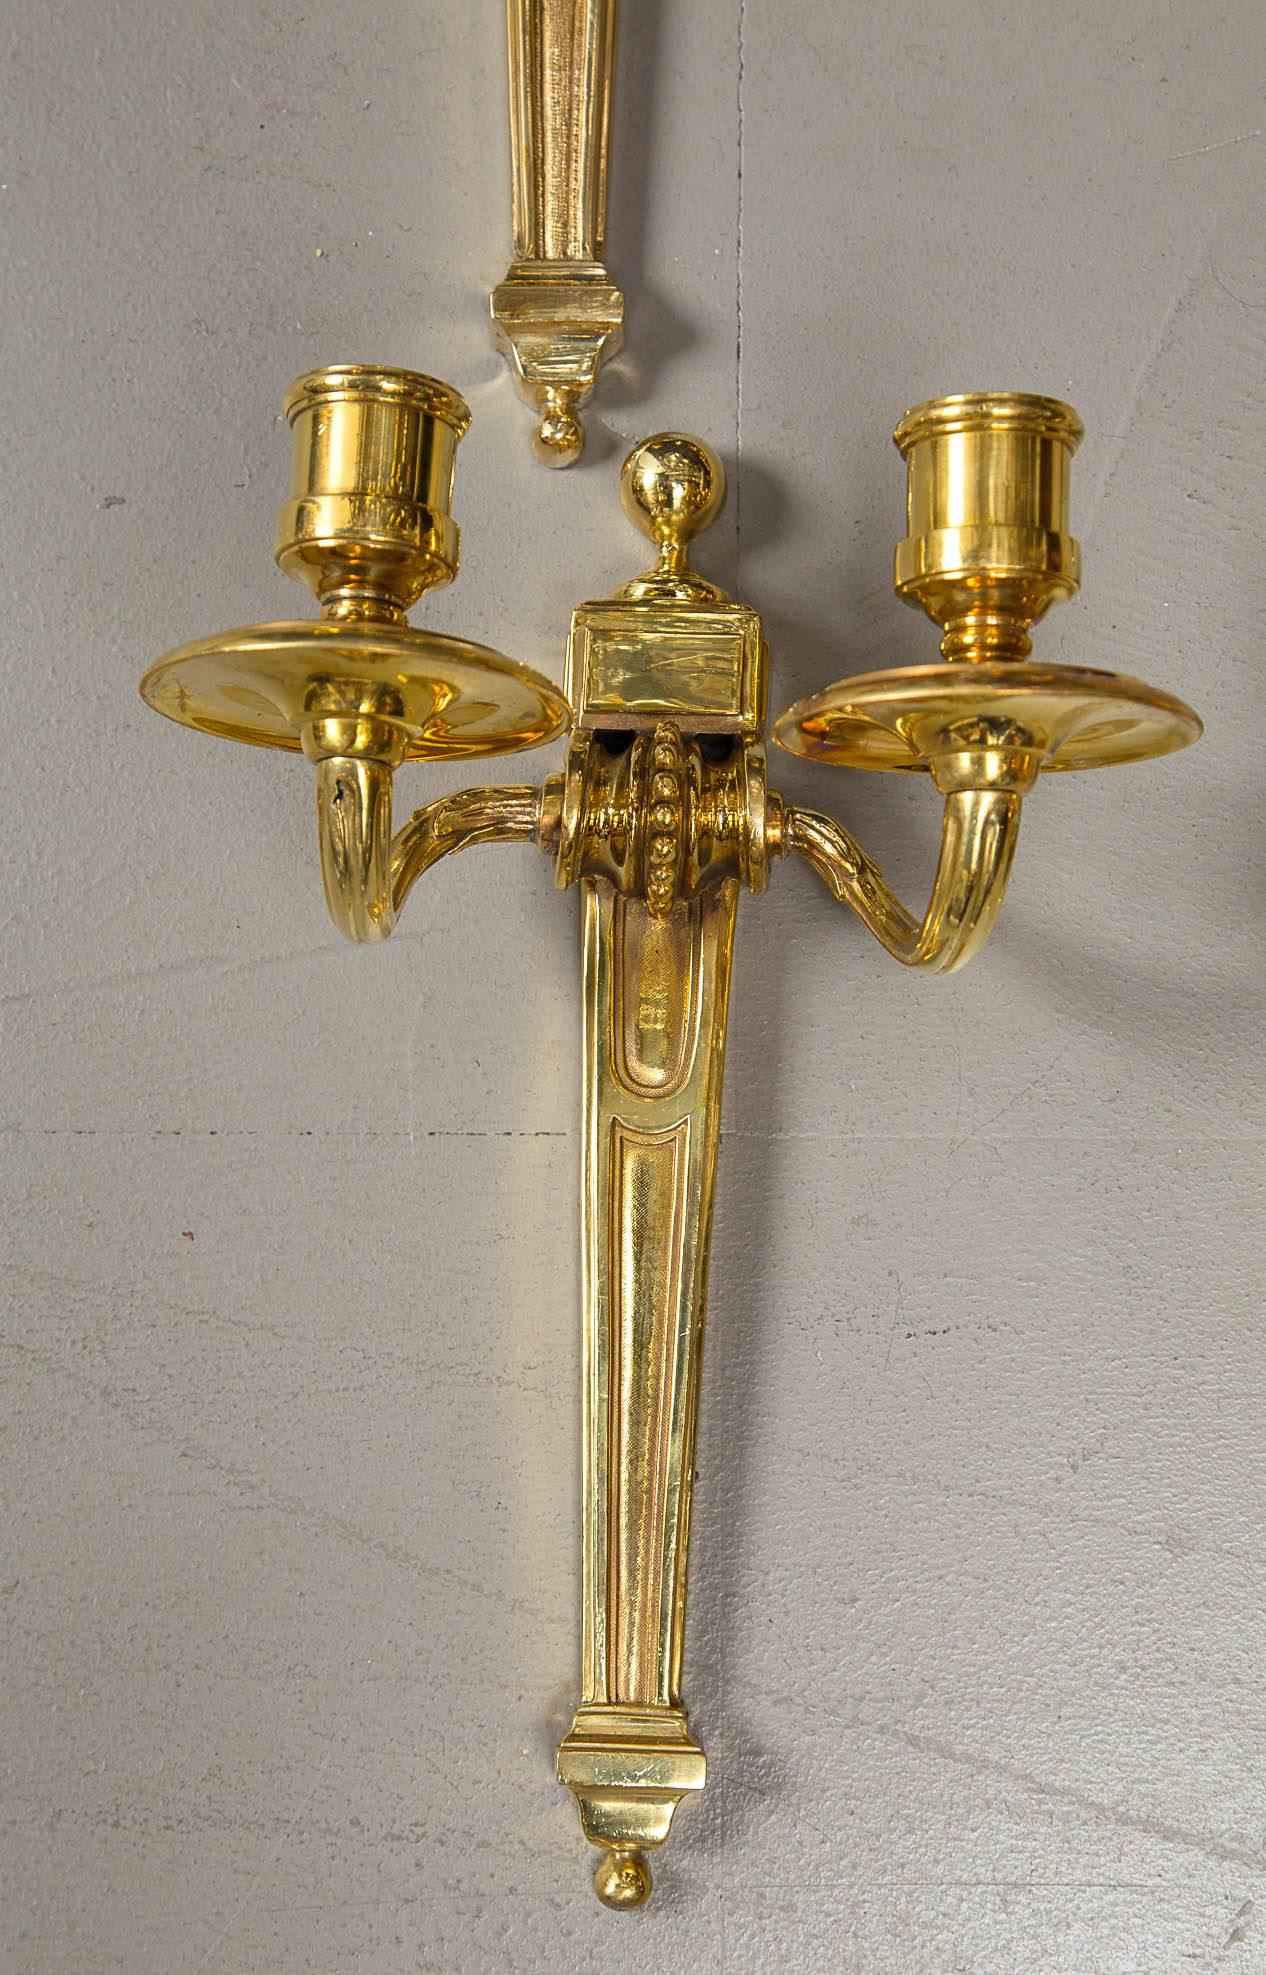 Set of eight, Caldwell gilt bronze sconces; $4,800 a pair, four pairs available, circa 1920s.